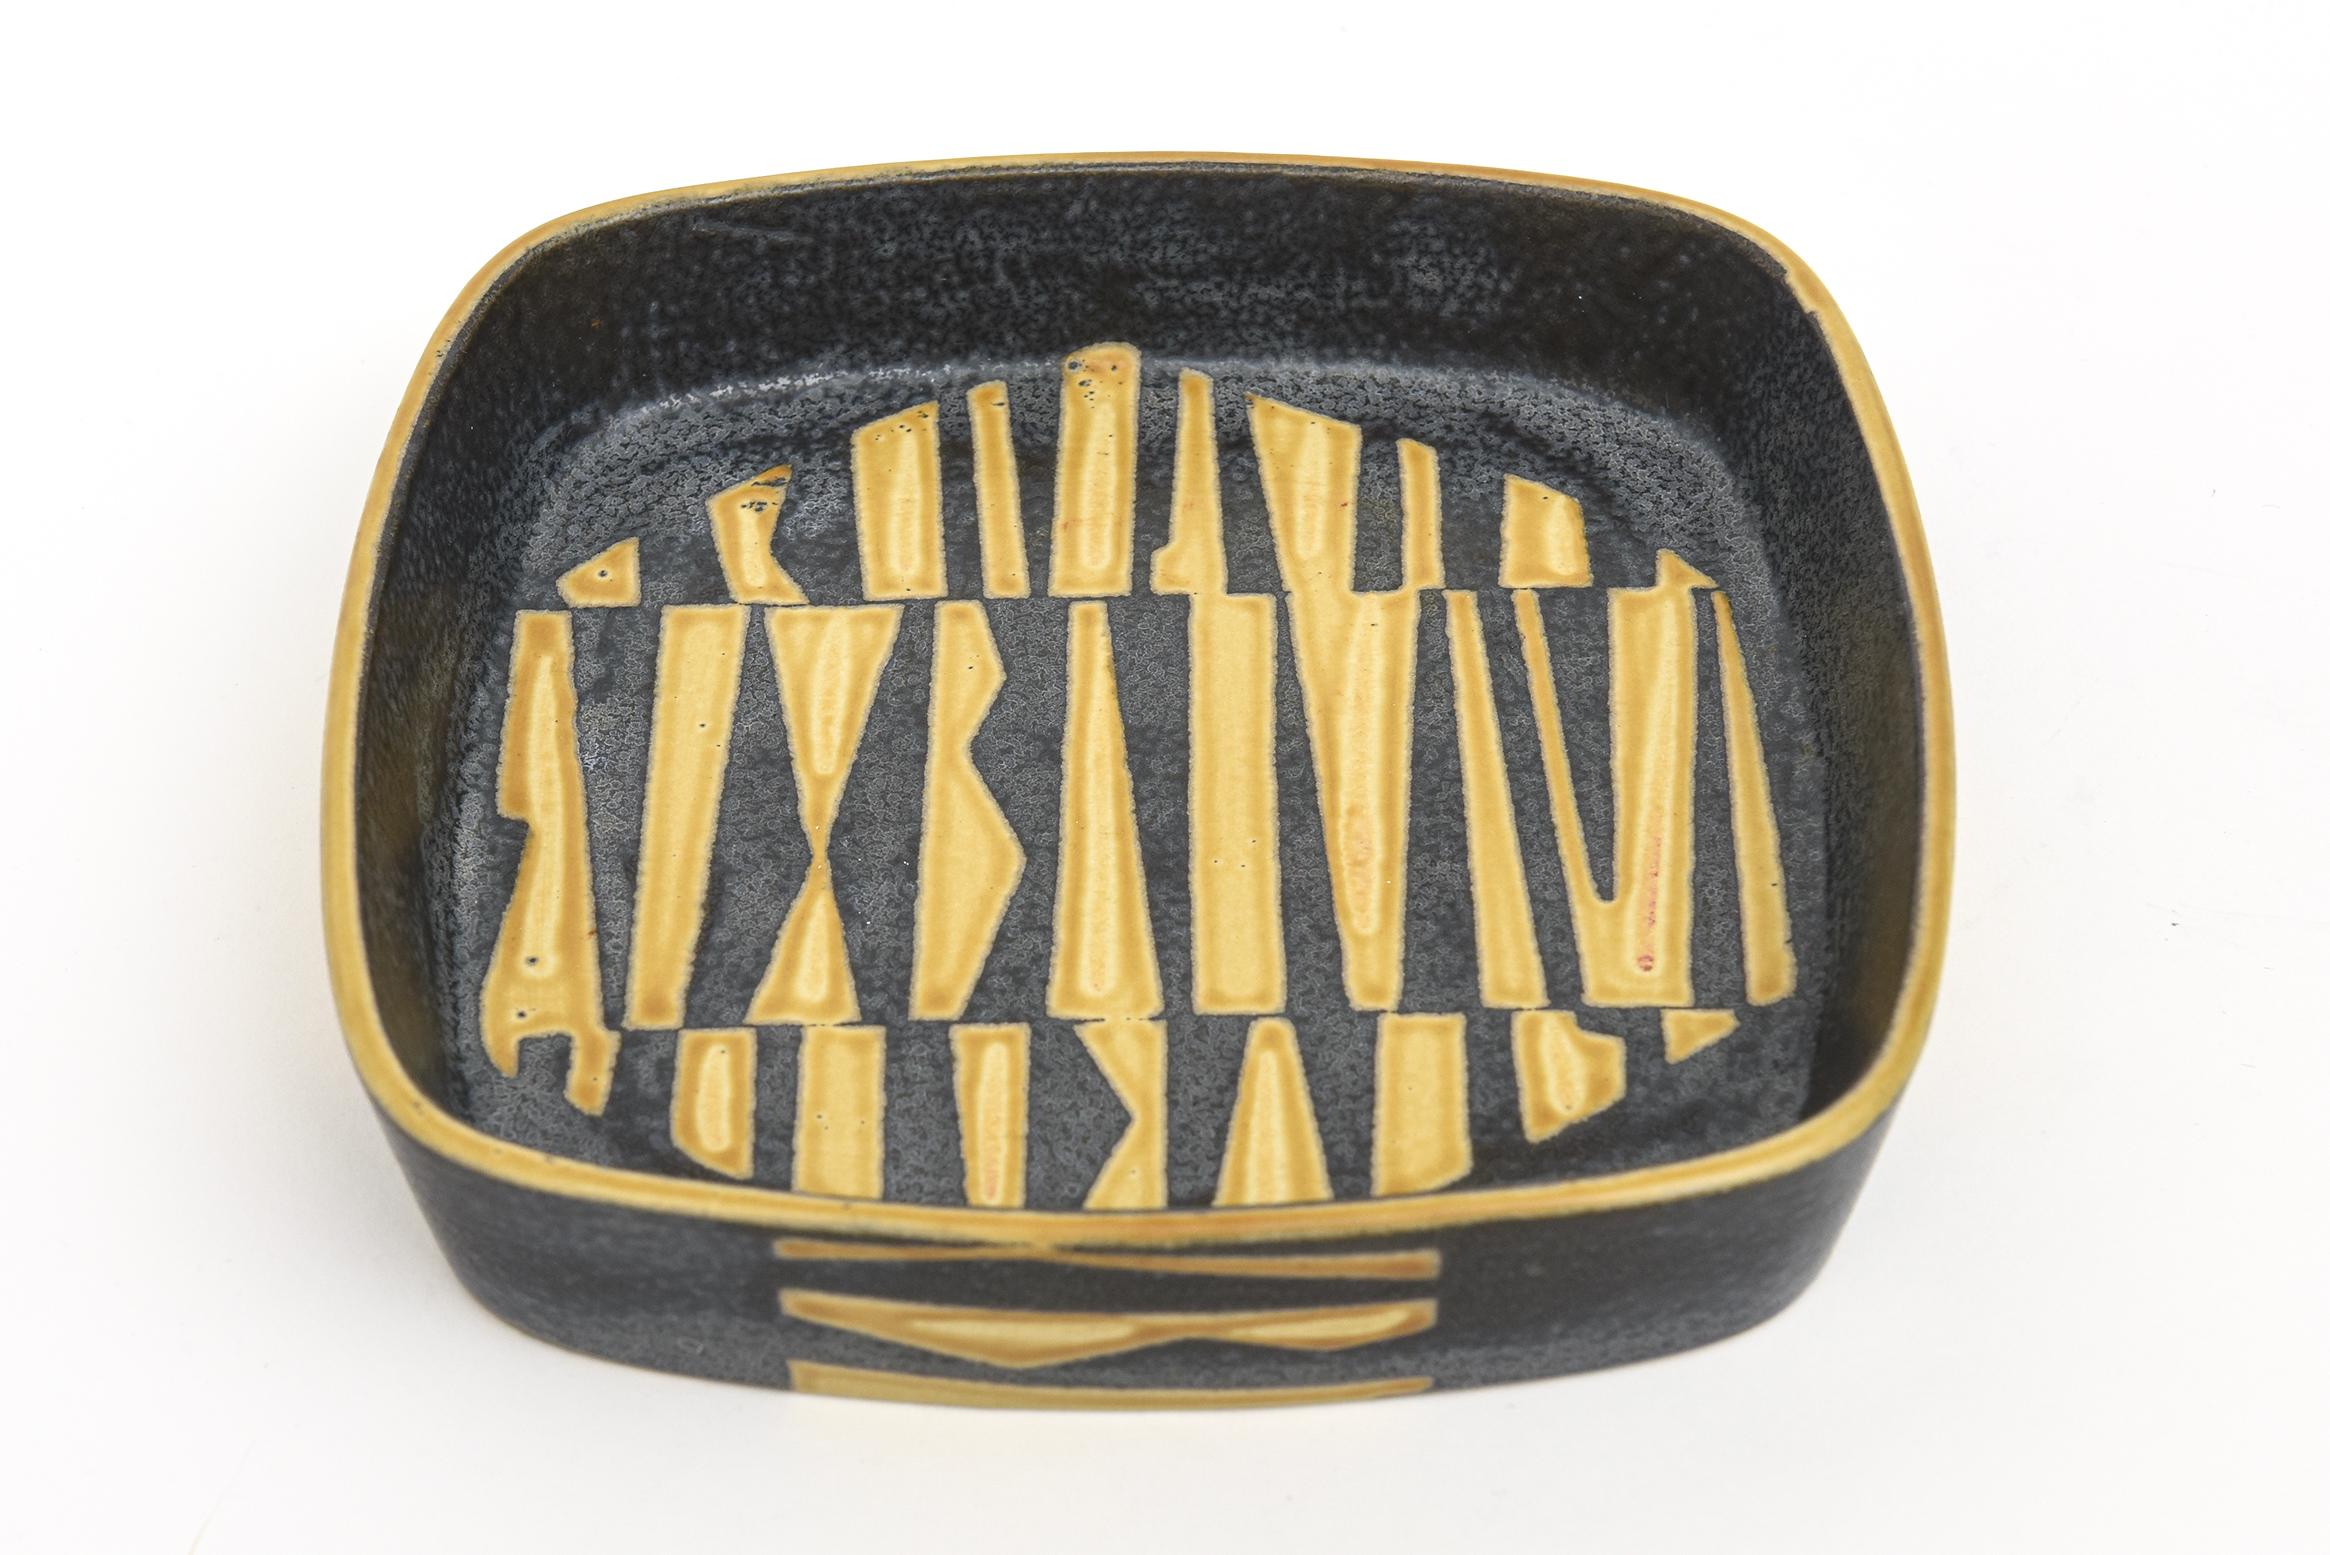 This vintage Royal Copenhagen glazed ceramic bowl by the designer Nils Thorsson is a faience method which is the process of adding tin oxide to glaze the earthenware.
It is from the Boca series which incorporated abstract to geometric lines in